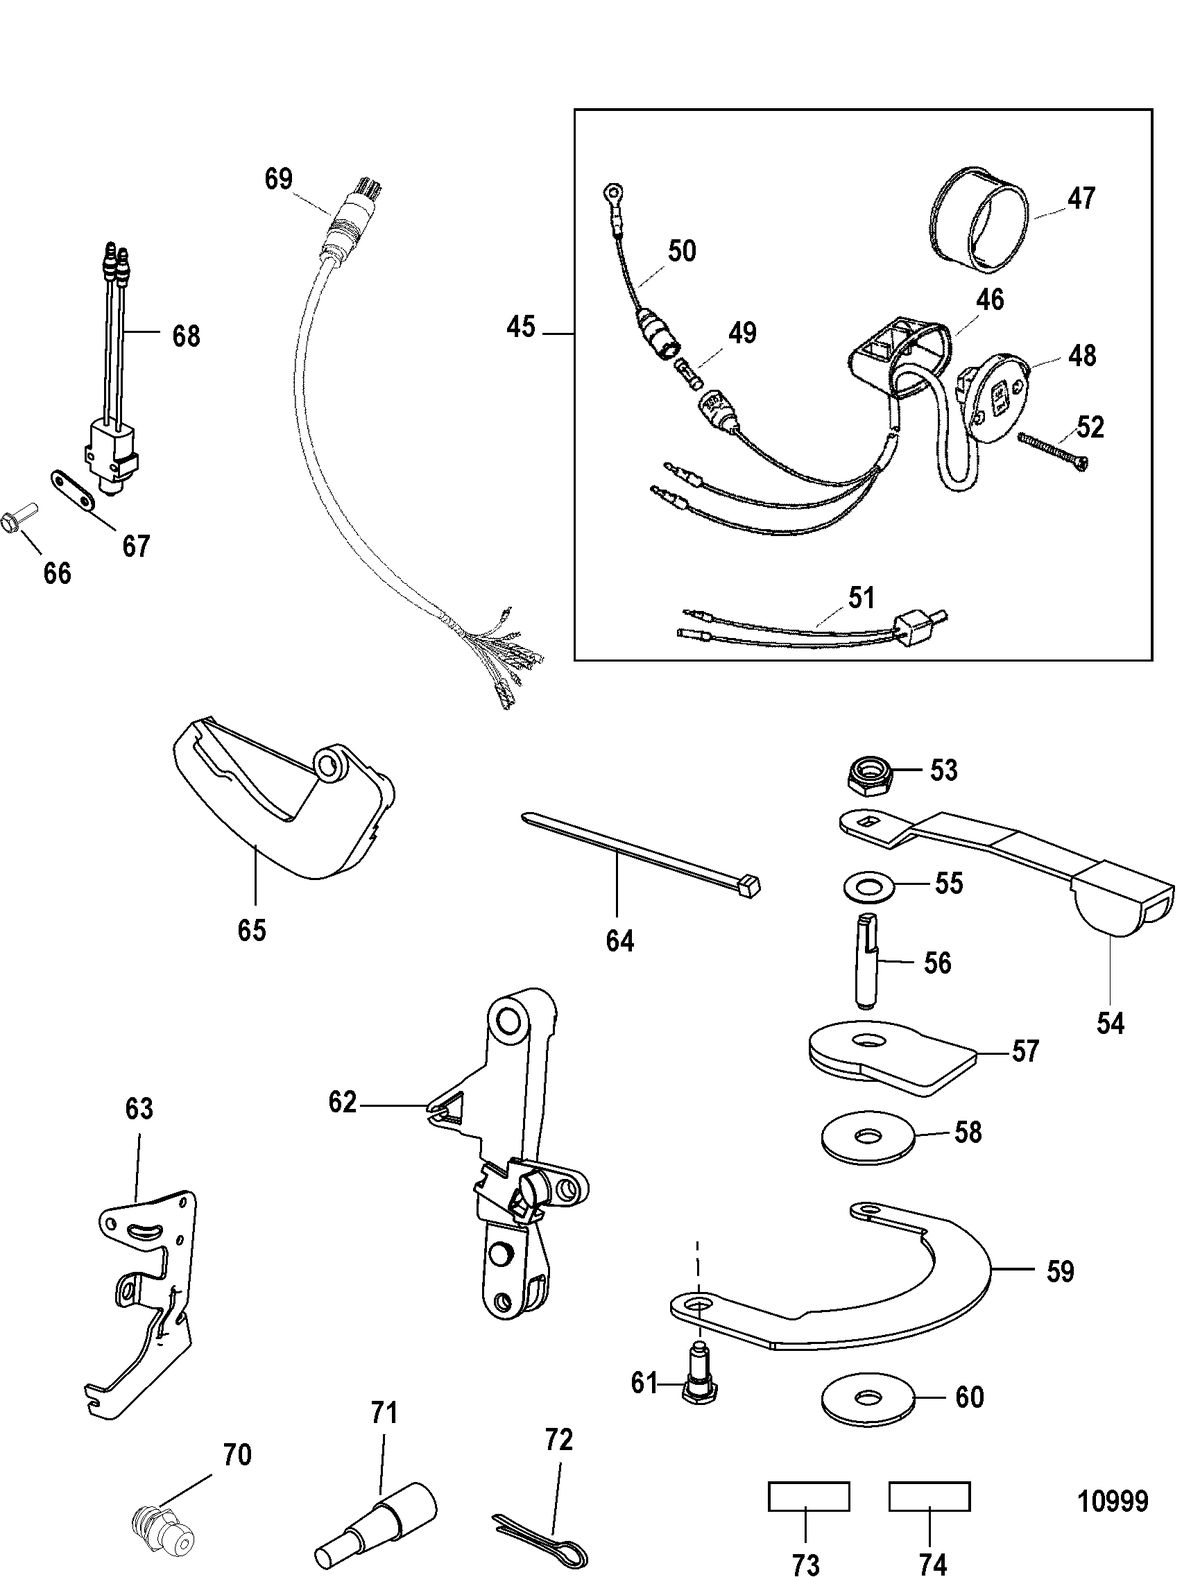 ACCESSORIES STEERING SYSTEMS AND COMPONENTS Tiller Handle Kit Components(828813A2 / A3 / A33)